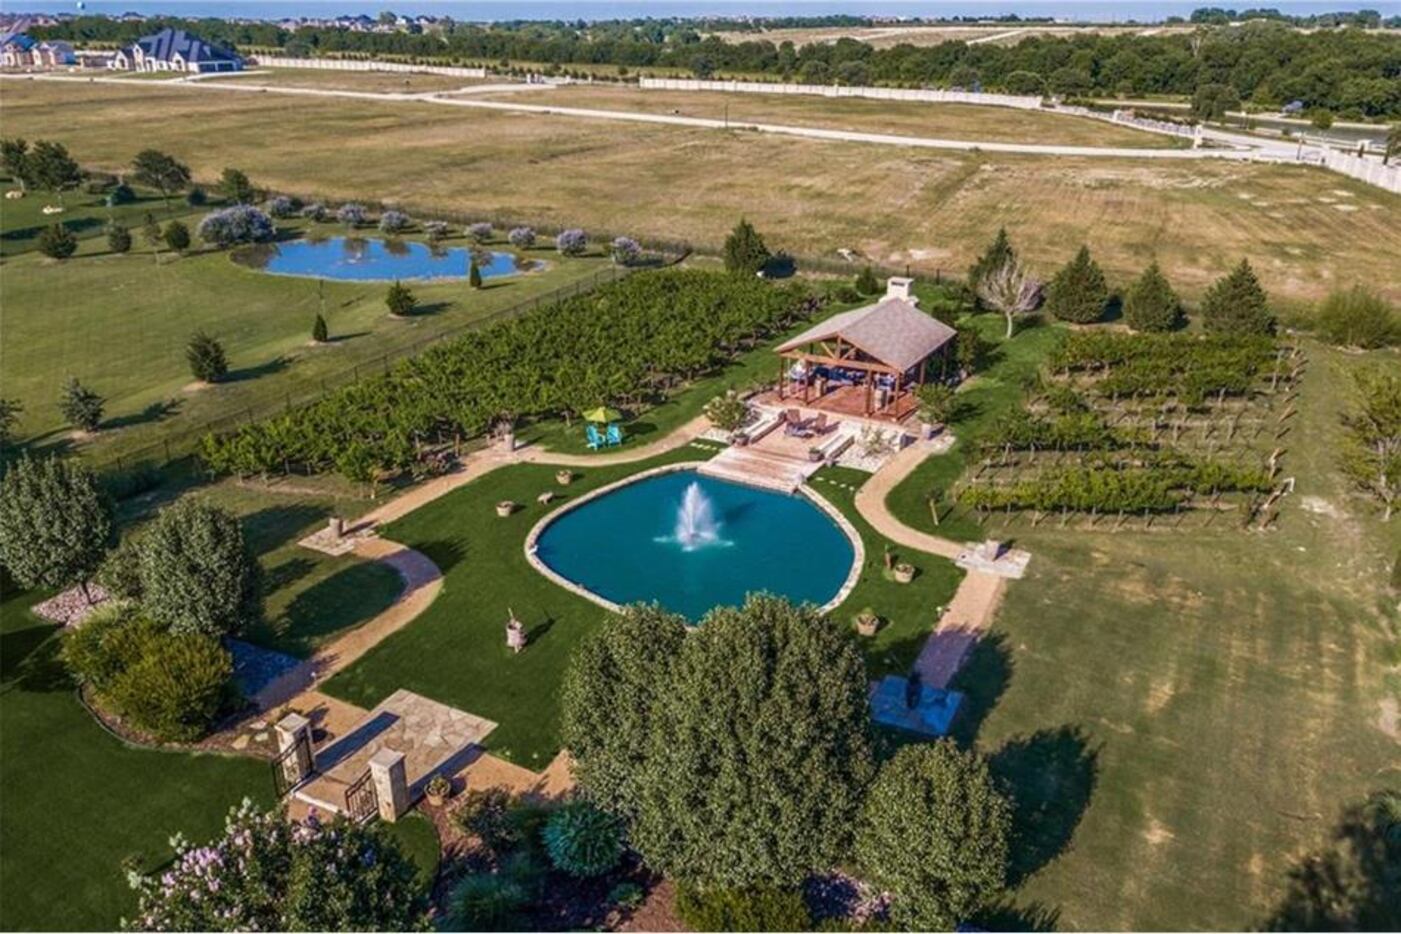 The estate east of Preston Road has a pool and vineyard.